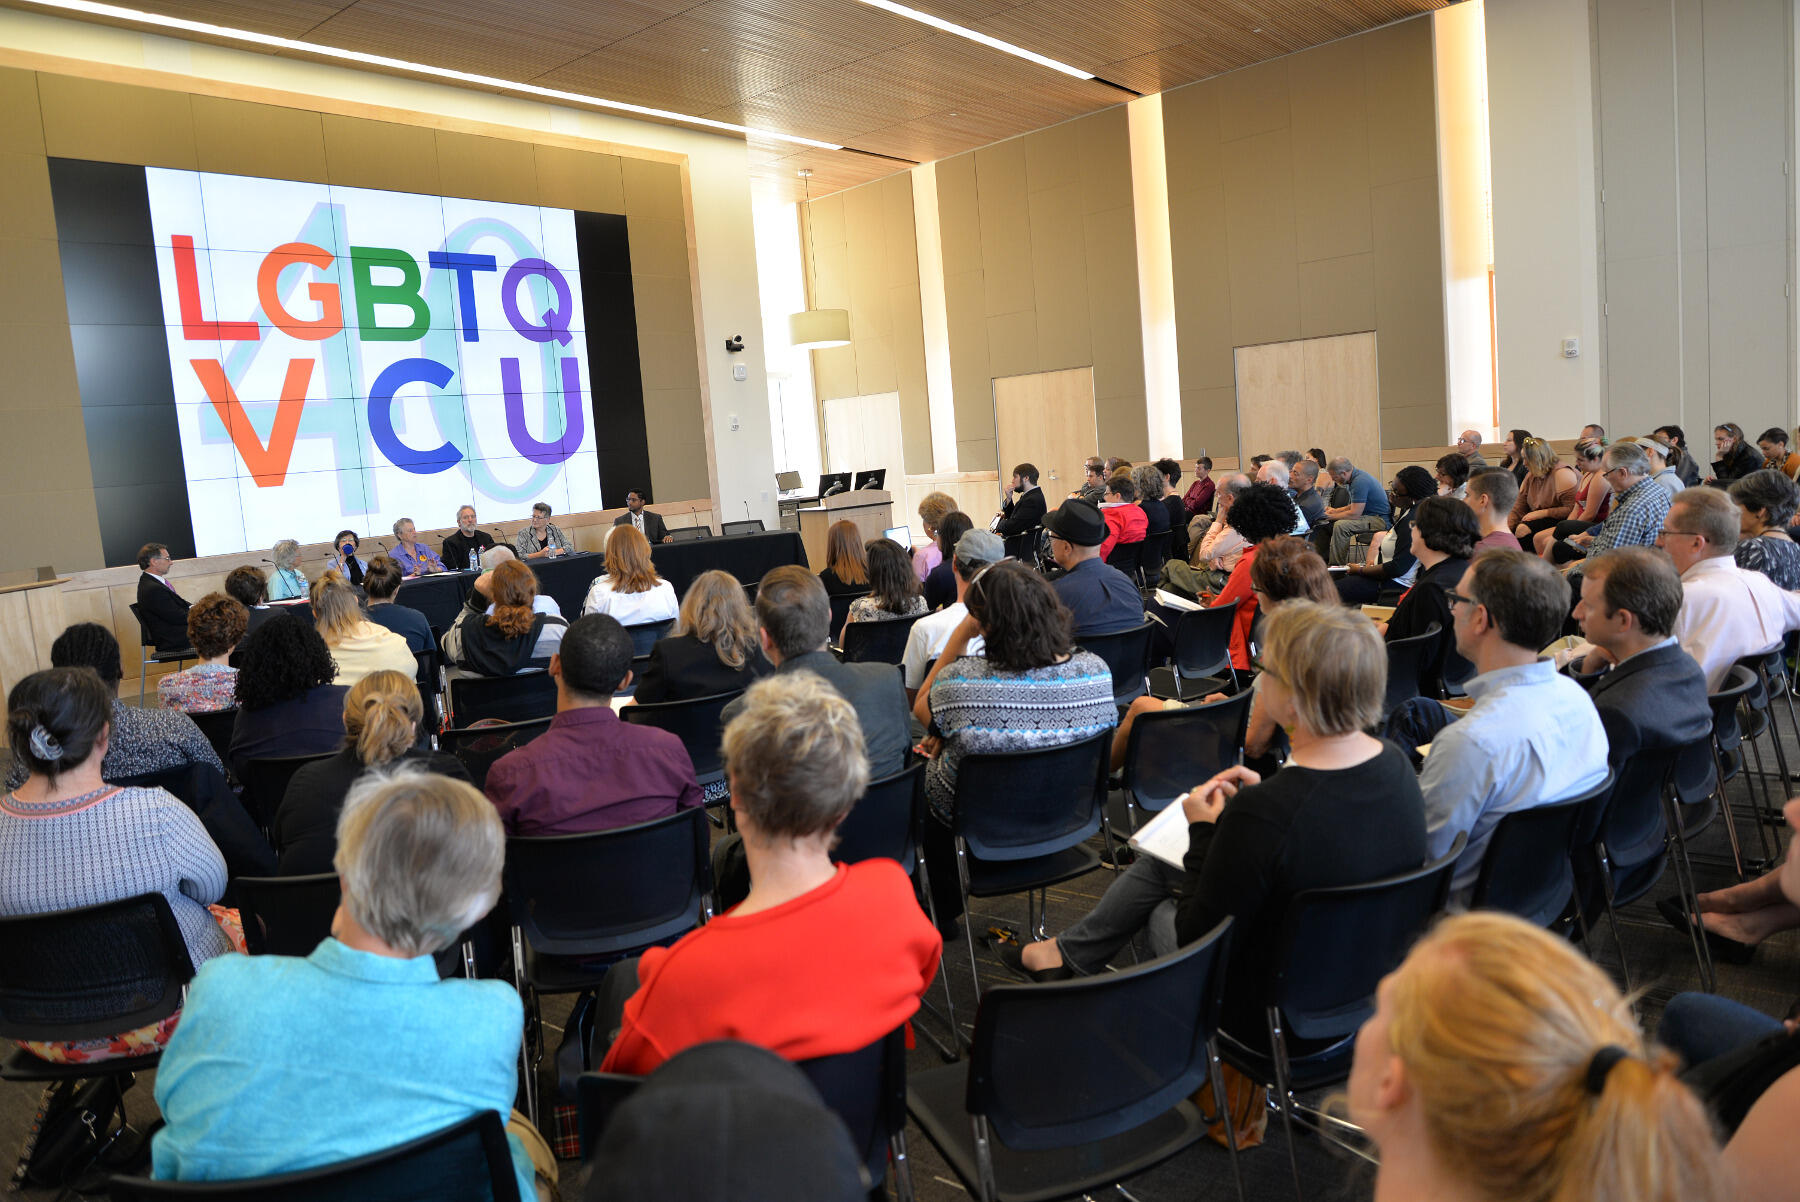 Tuesday afternoon, the VCU alumni who took part in the Gay Alliance of Students' founding and legal battle spoke at a panel discussion: "Trials and Triumphs, 1974-76: The Struggle for Recognition of VCU’s First Gay Student Group," which is part of the Humanities Research Center's fall speaker series.